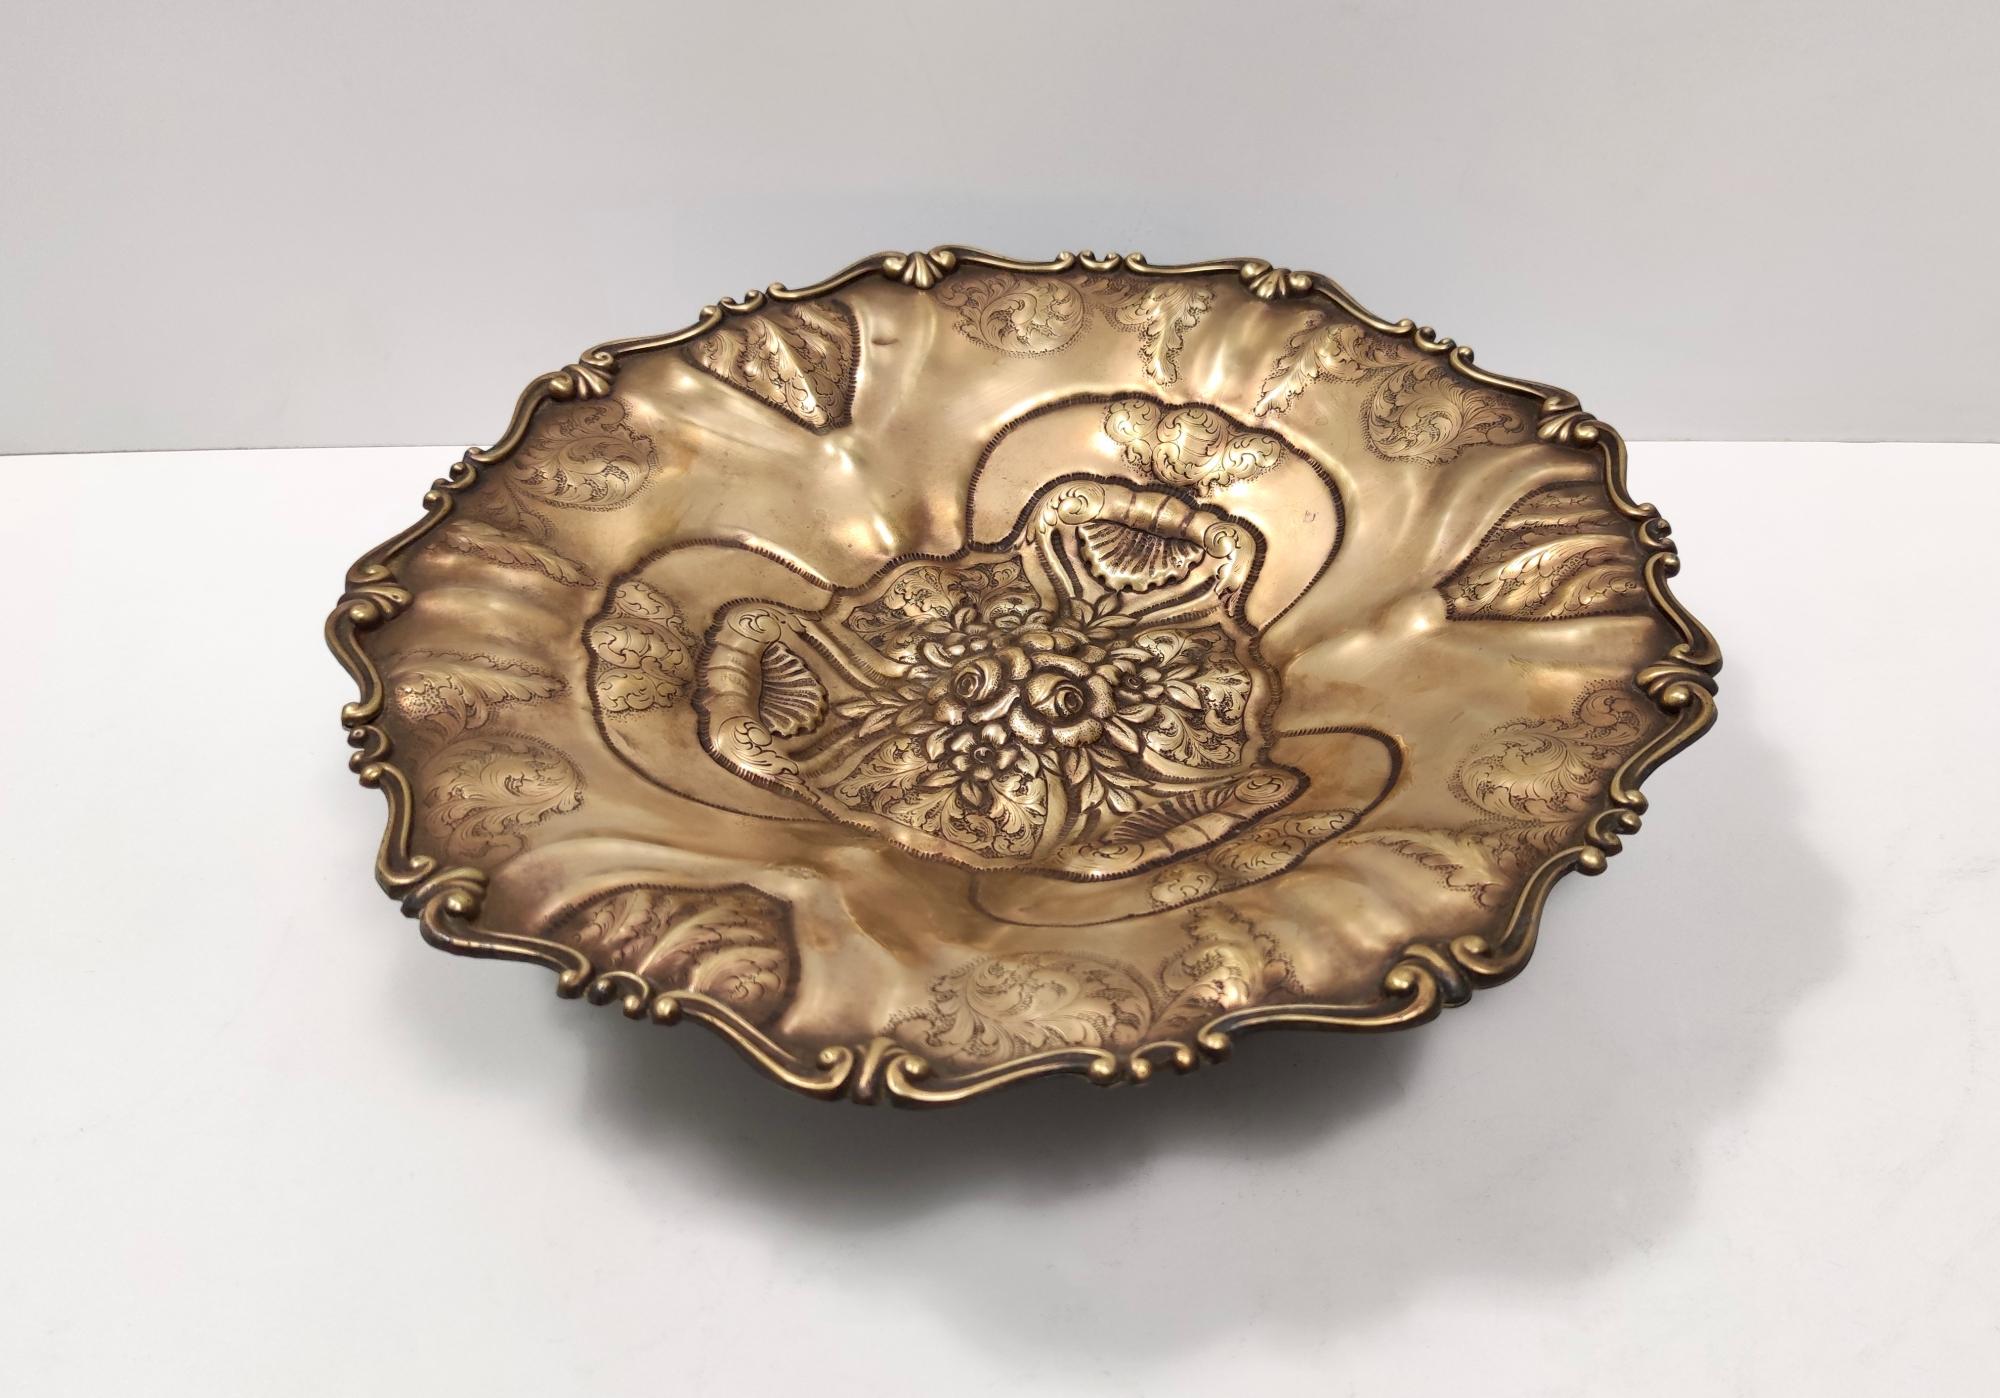 Vintage Chiseled and Embossed Cast Bronze Centerpiece / Bowl, Italy In Excellent Condition For Sale In Bresso, Lombardy